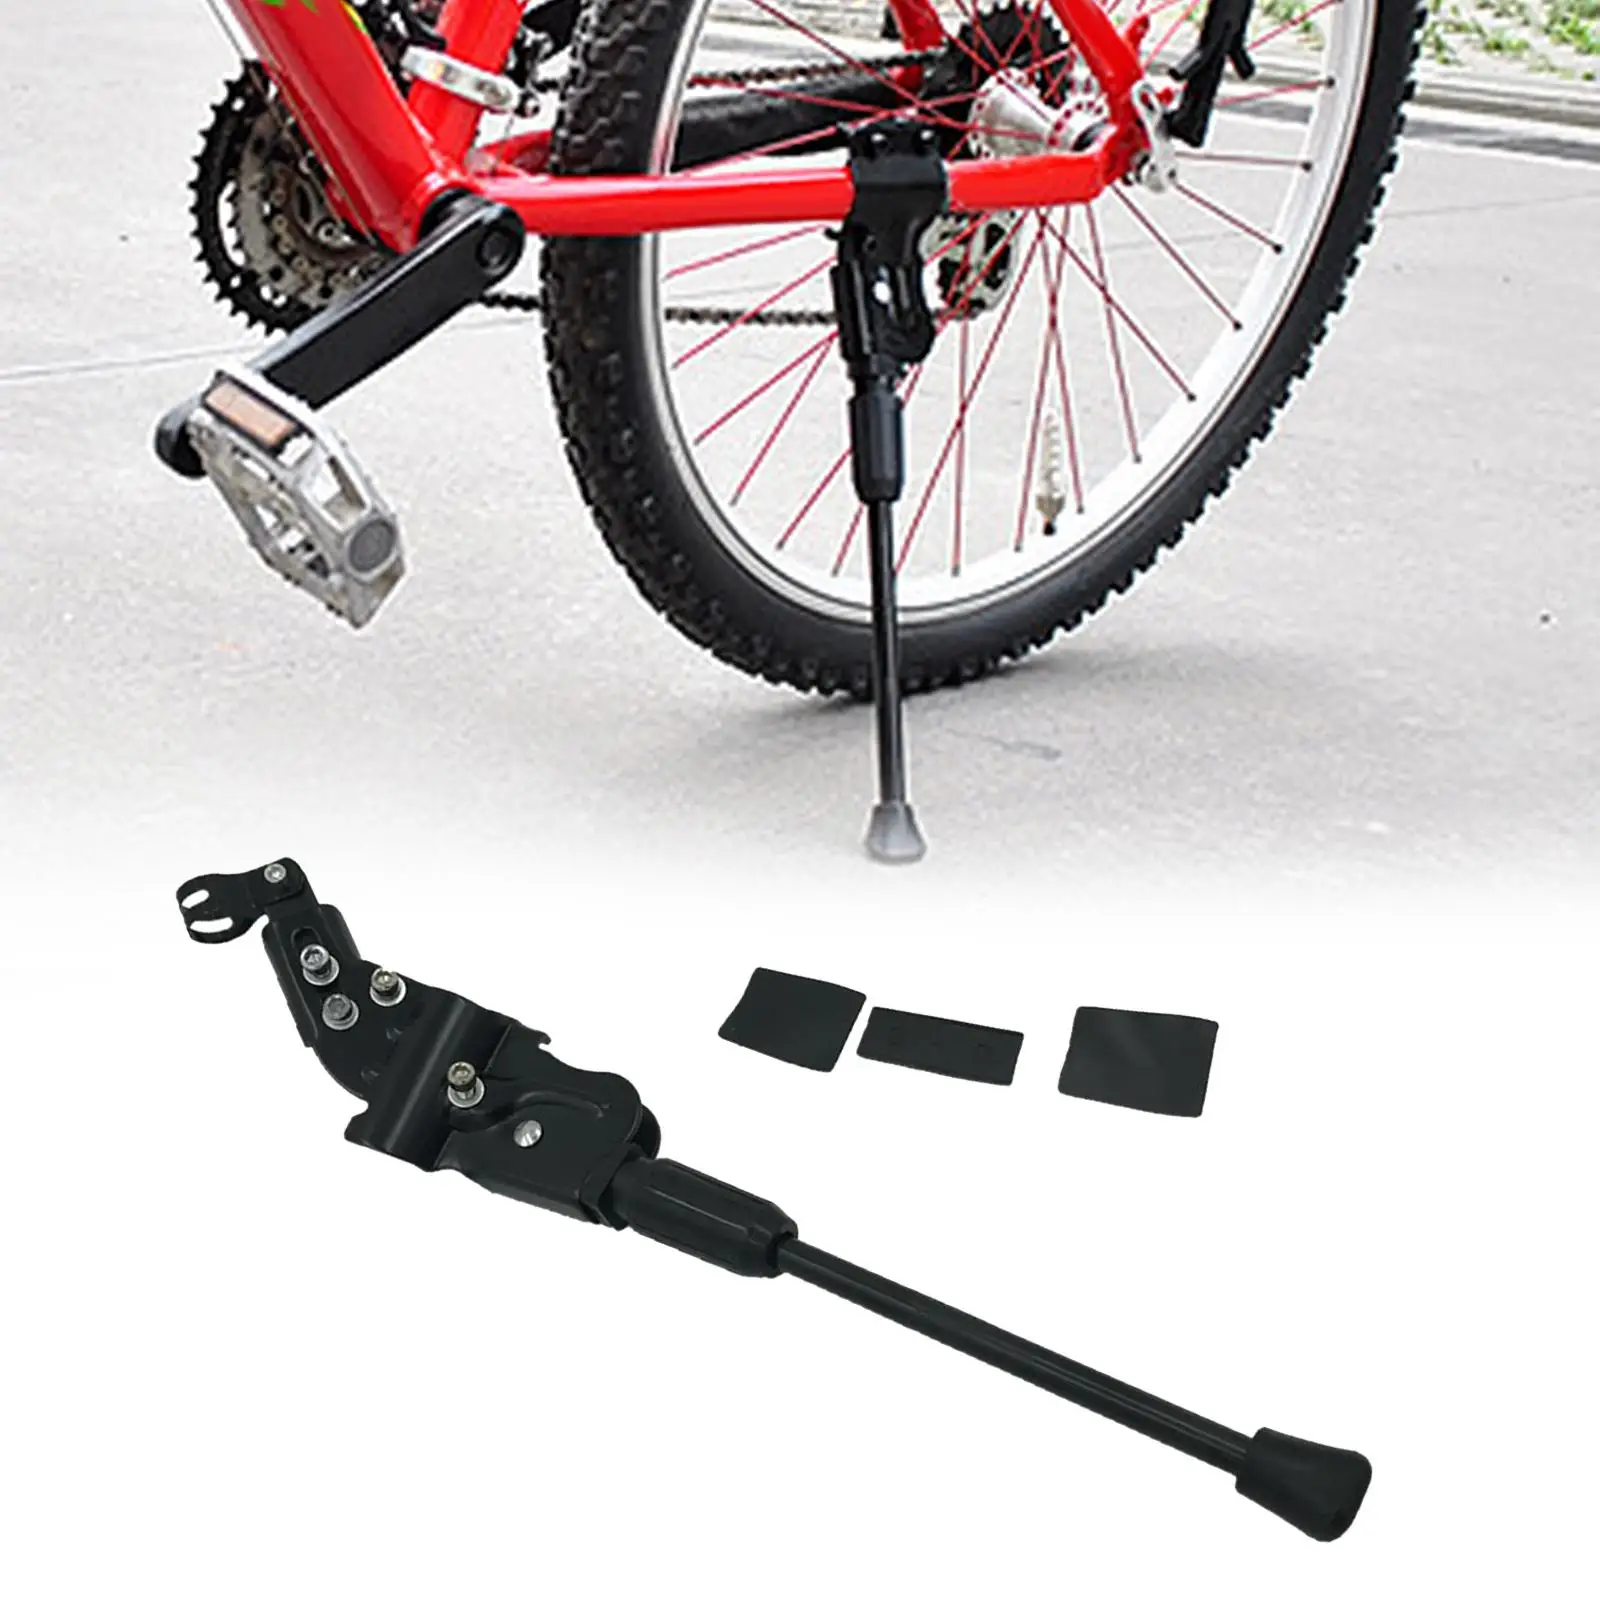 Bicycle Kickstand Bike Side Support Kick Stand for 26 inch Mountain Bike Convenient Durable Parking Stand Cycling Kickstand